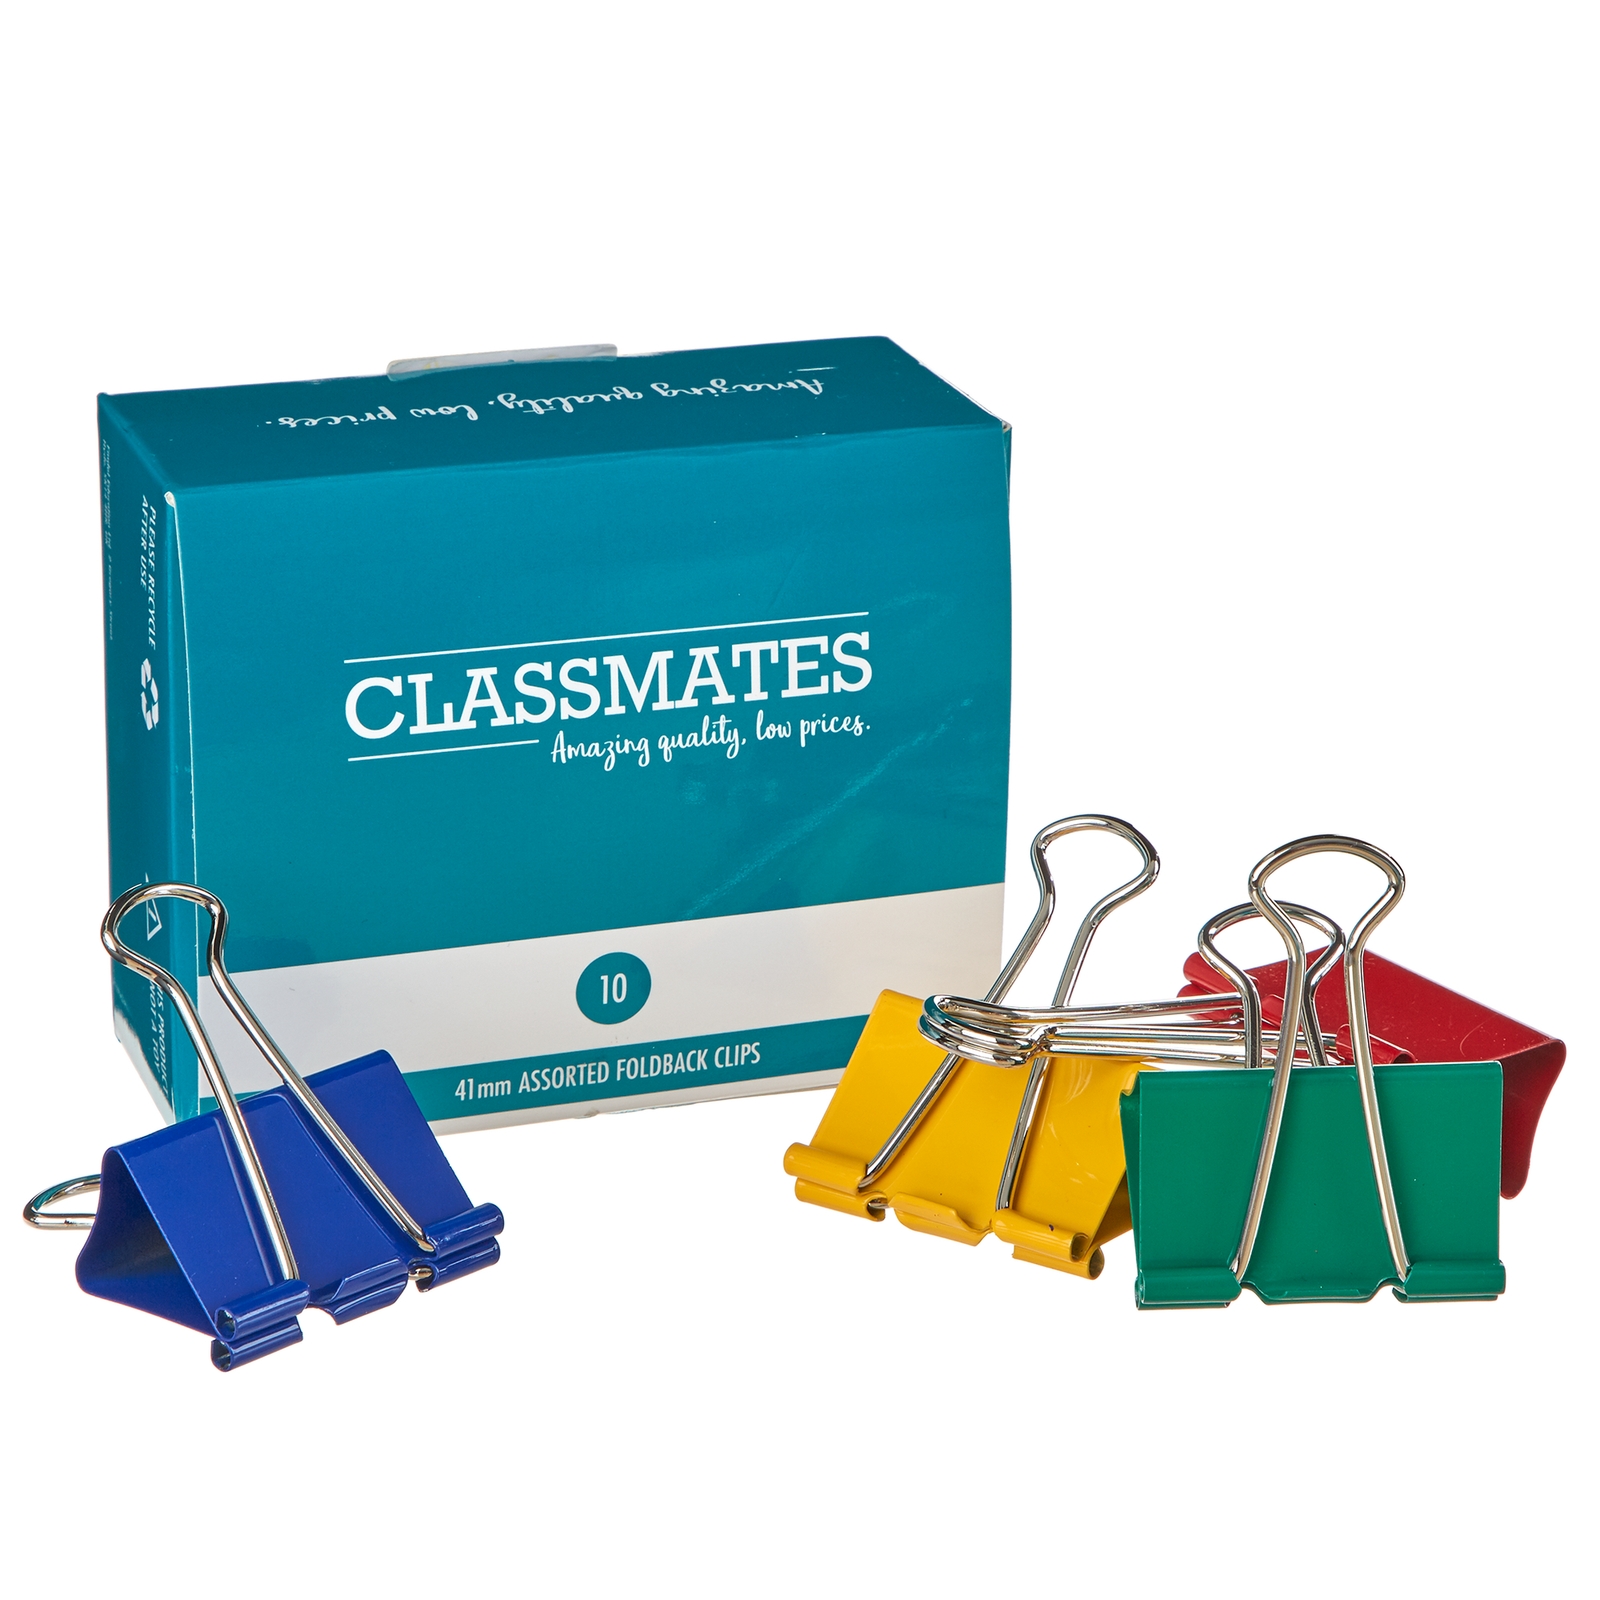 Classmates Fold Back Clip Assorted 41mm - Pack of 10